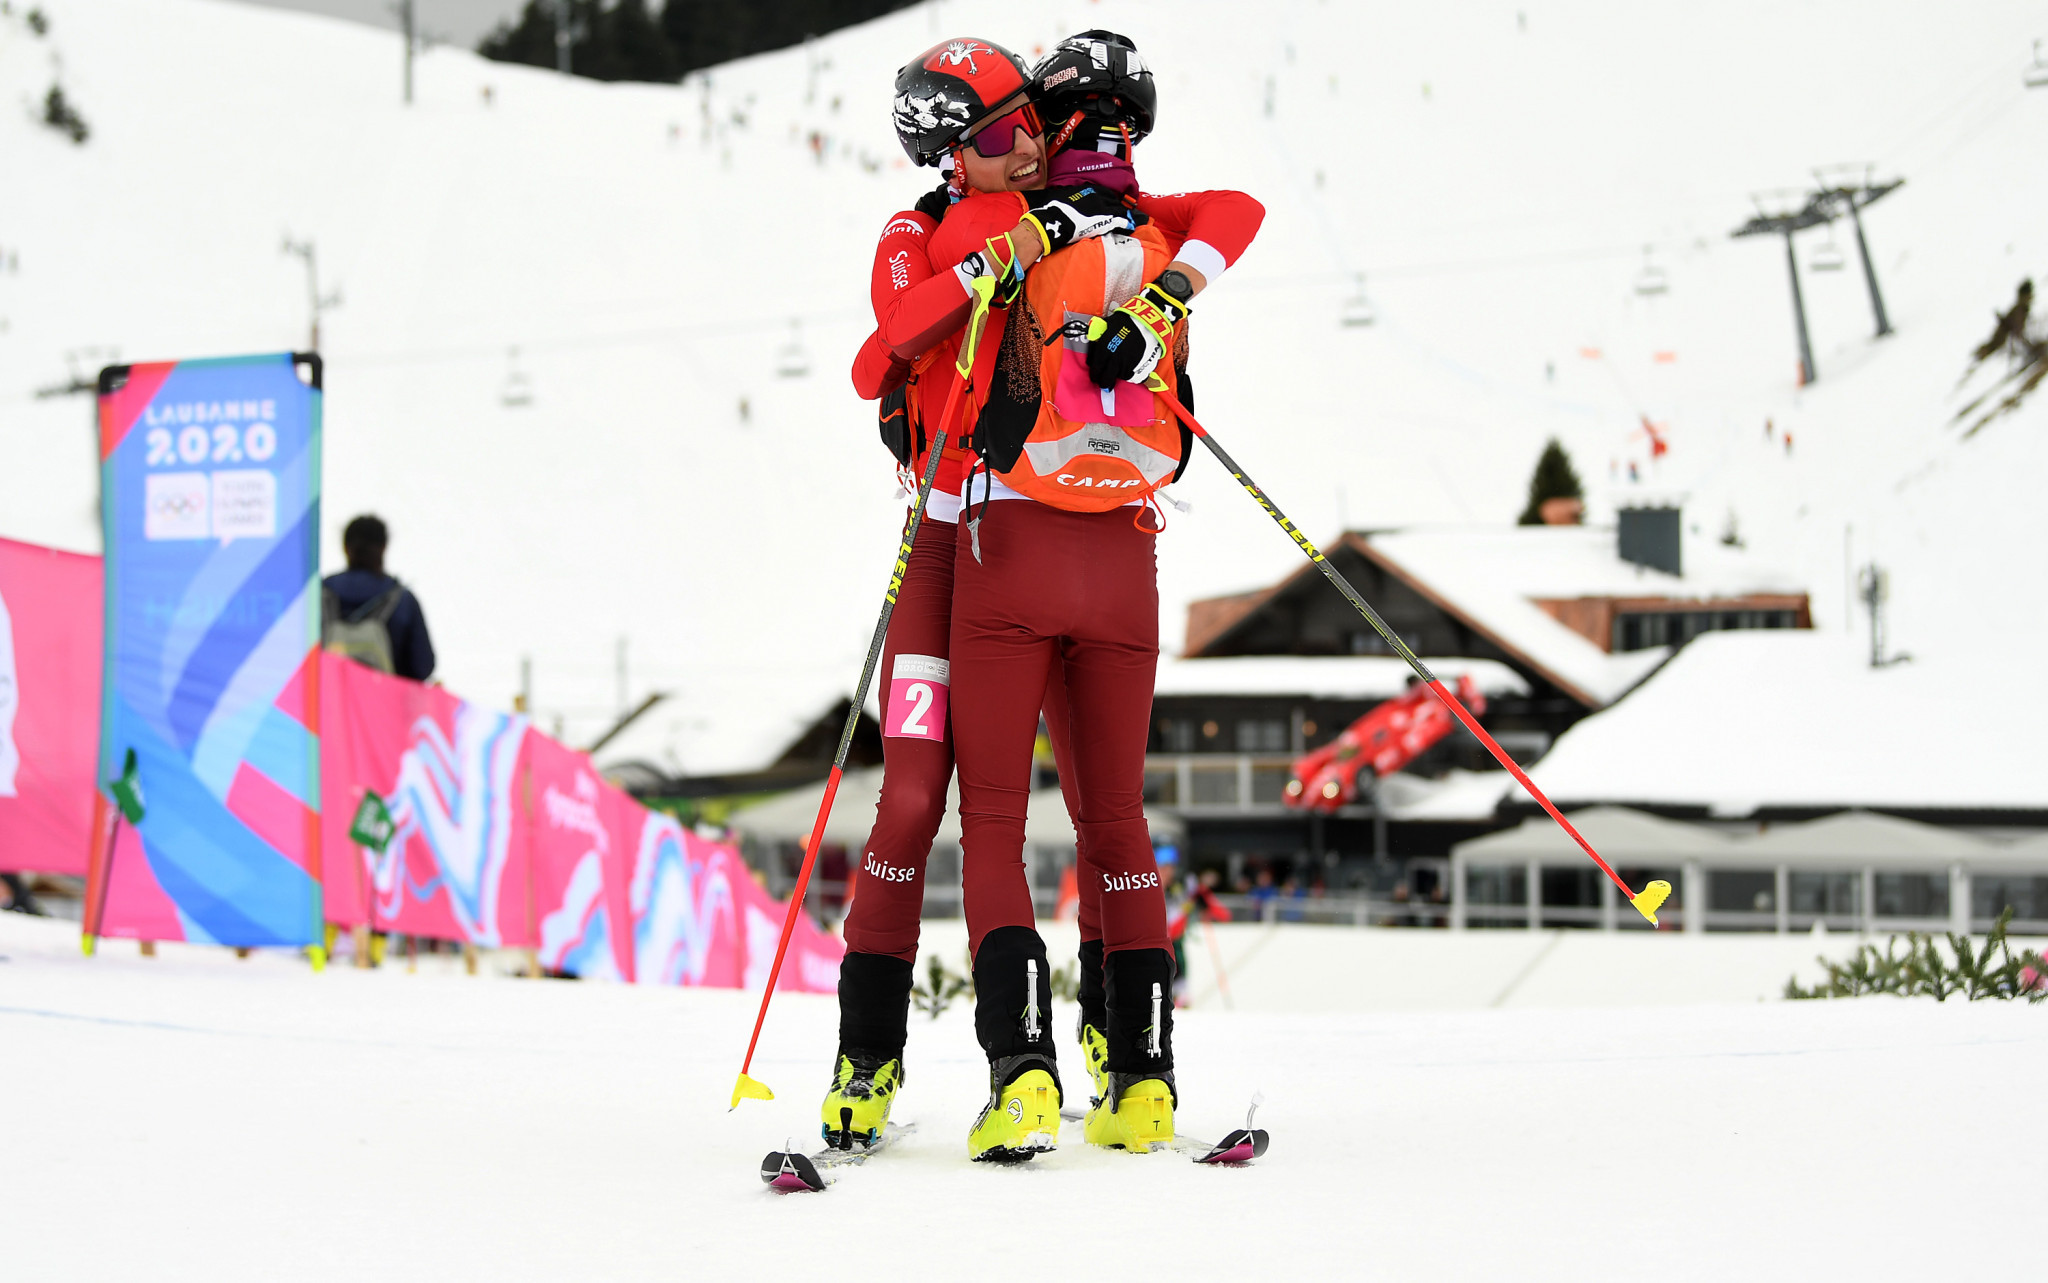 Bussard twins win ski mountaineering silver and gold at Lausanne 2020